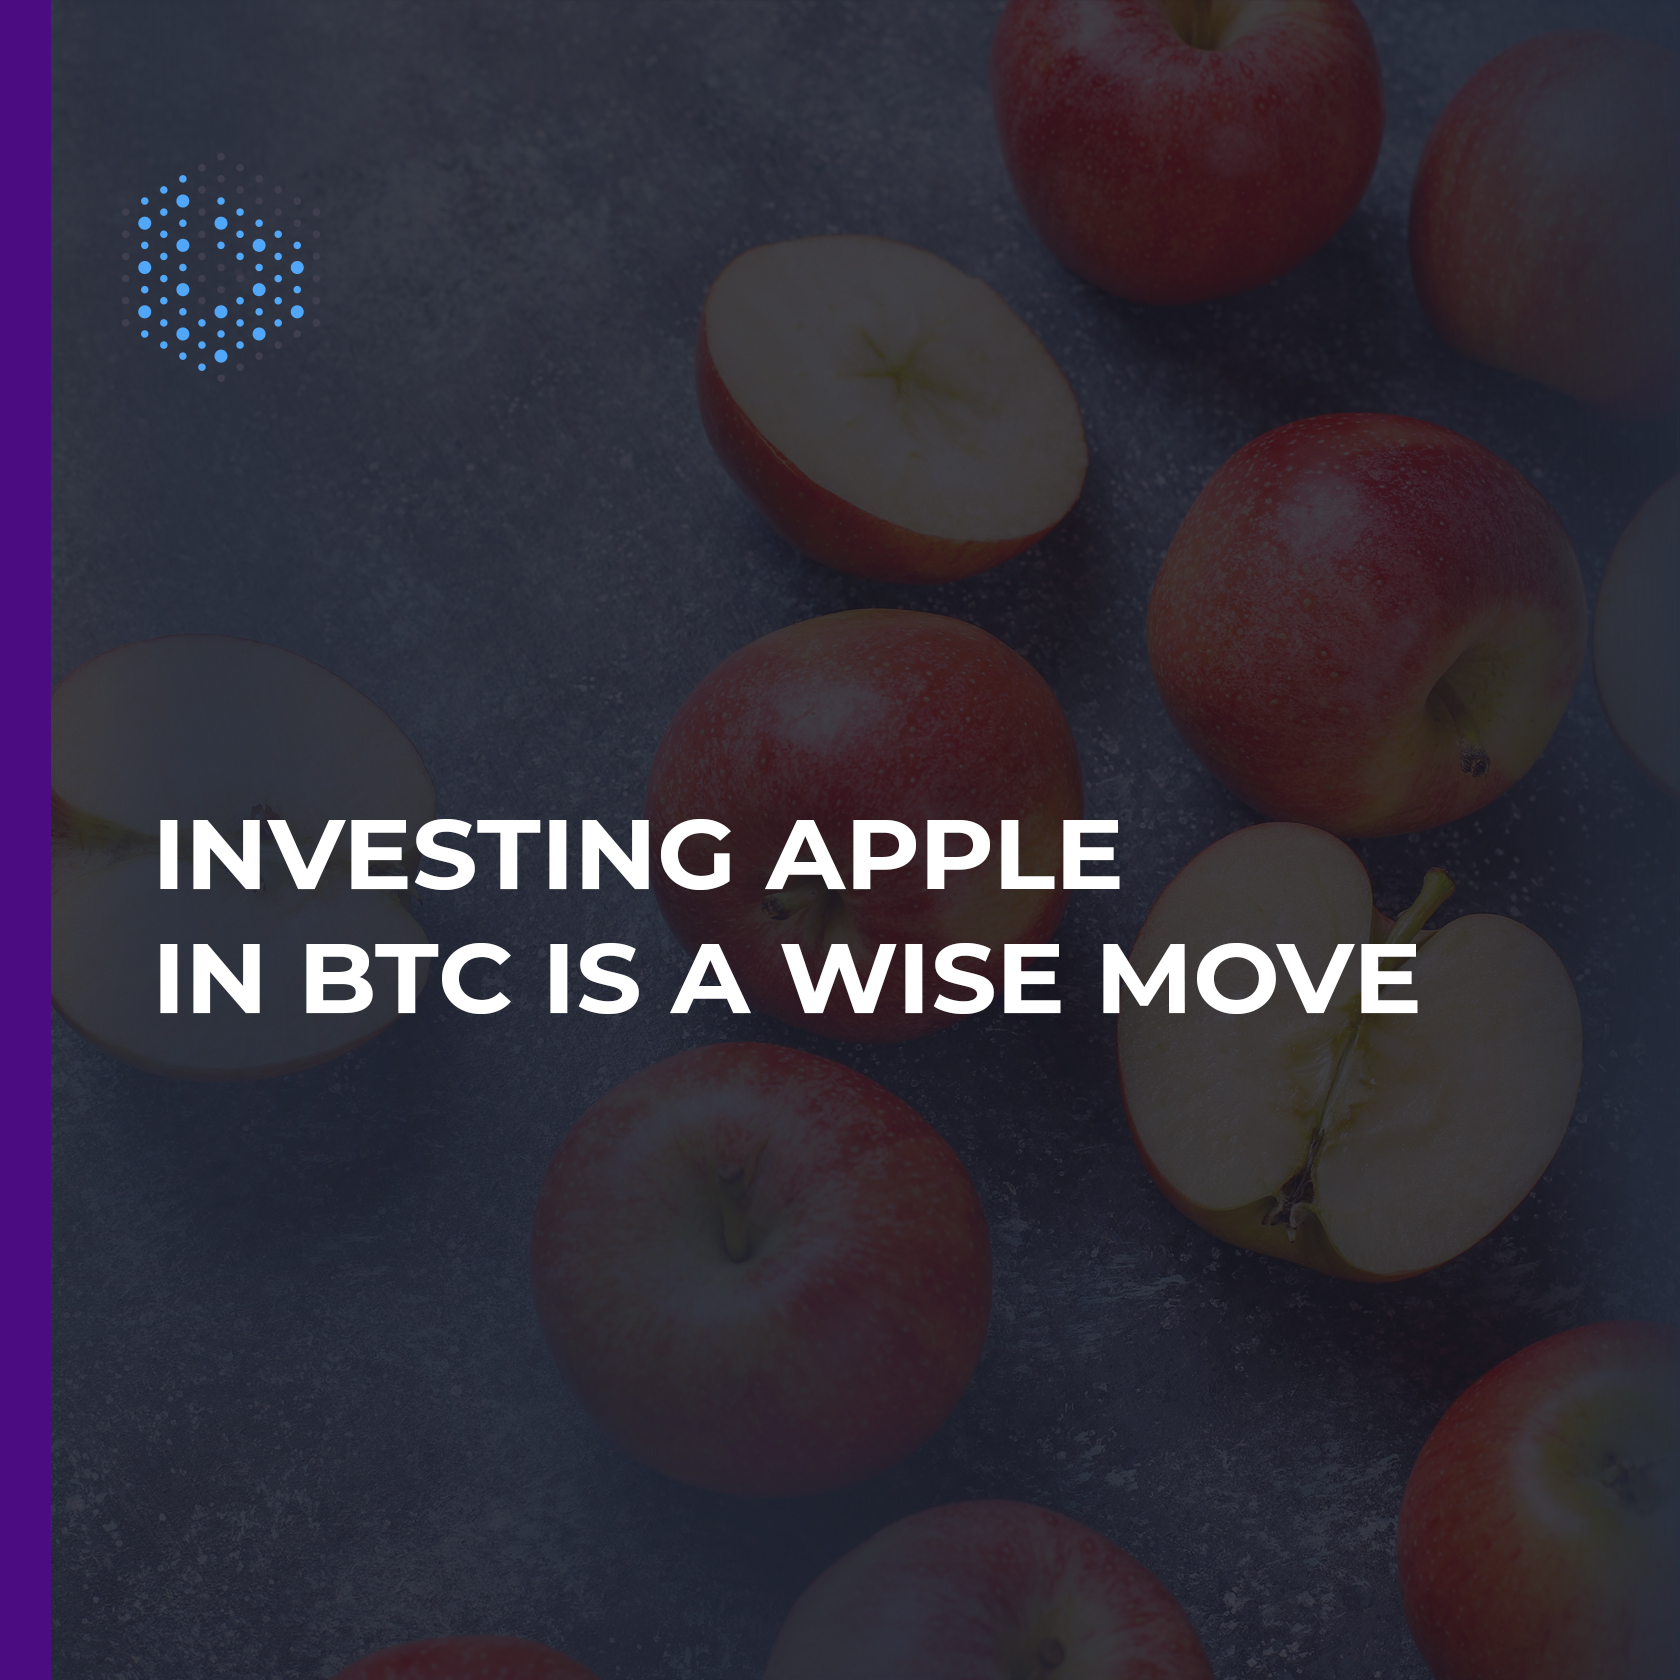 MicroStrategy CEO Michael Saylor says Apple could get another $ 100 billion with Bitcoin investment